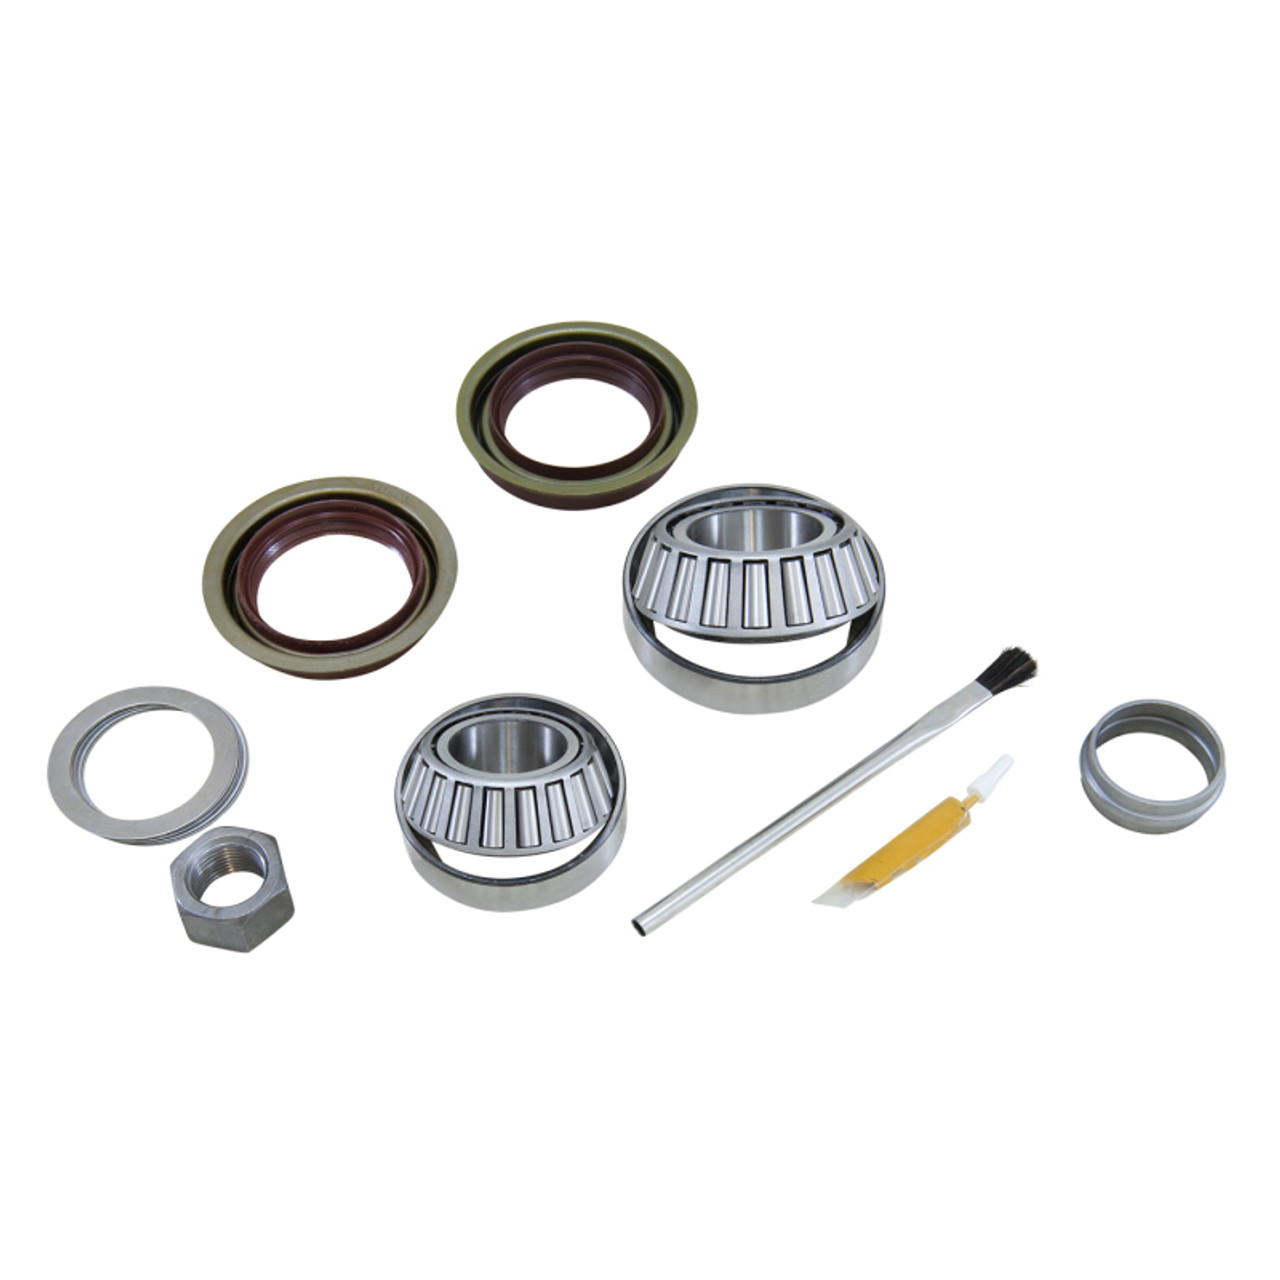 USA Standard Pinion installation Kit For 09 & Down Ford 8.8 - ZPKF8.8-A